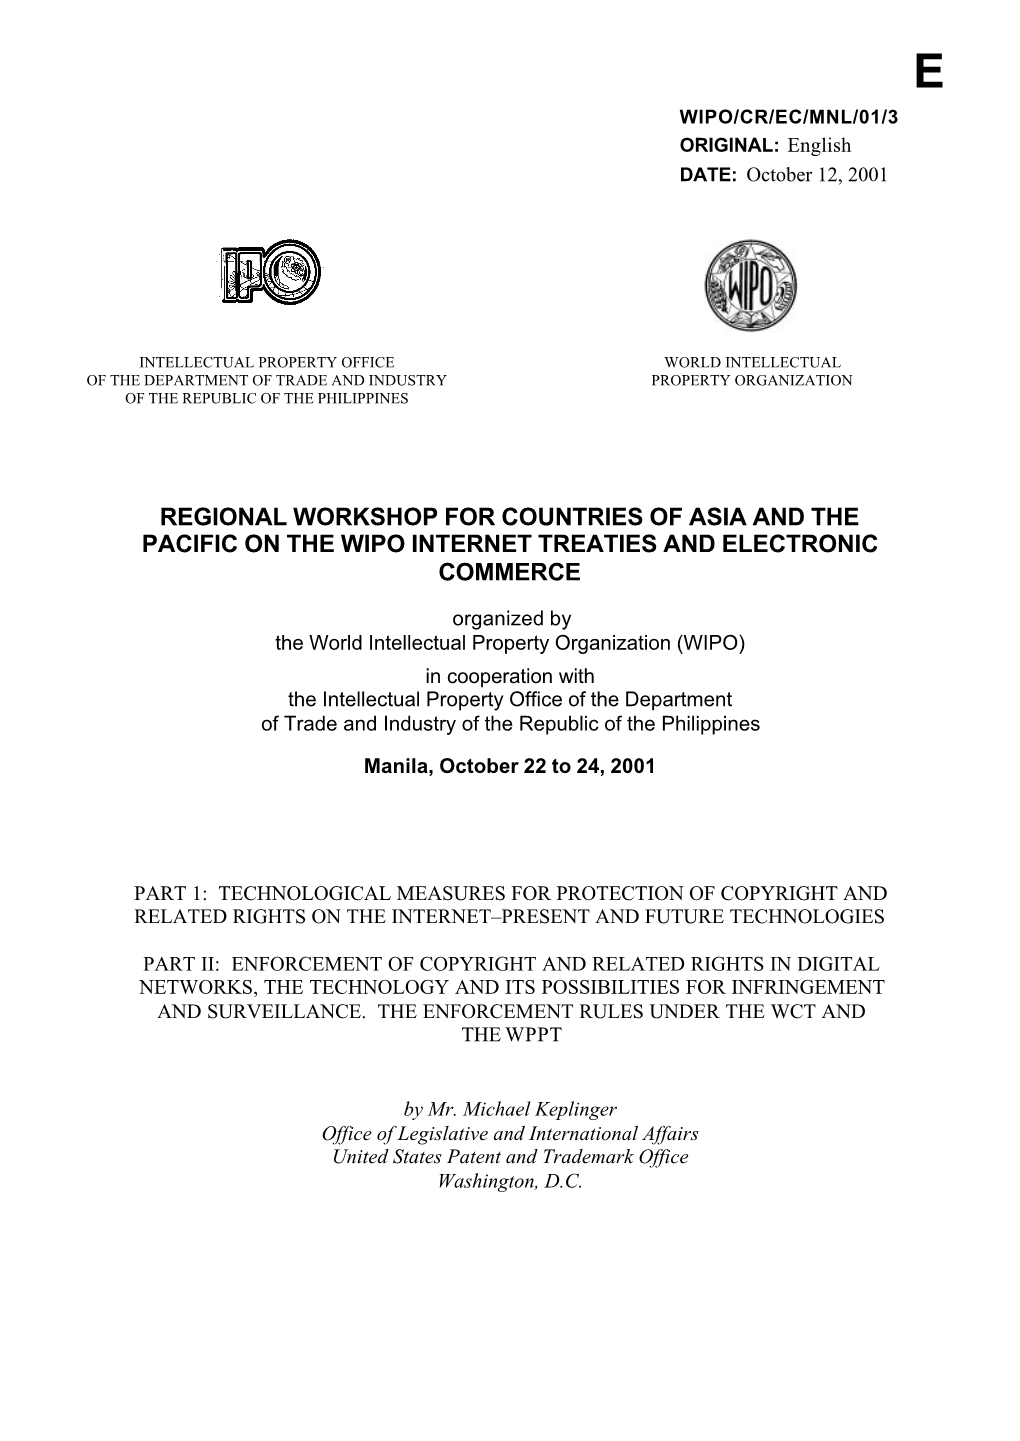 WIPO/CR/EC/MNL/01/3 : Part I: Technological Measures For